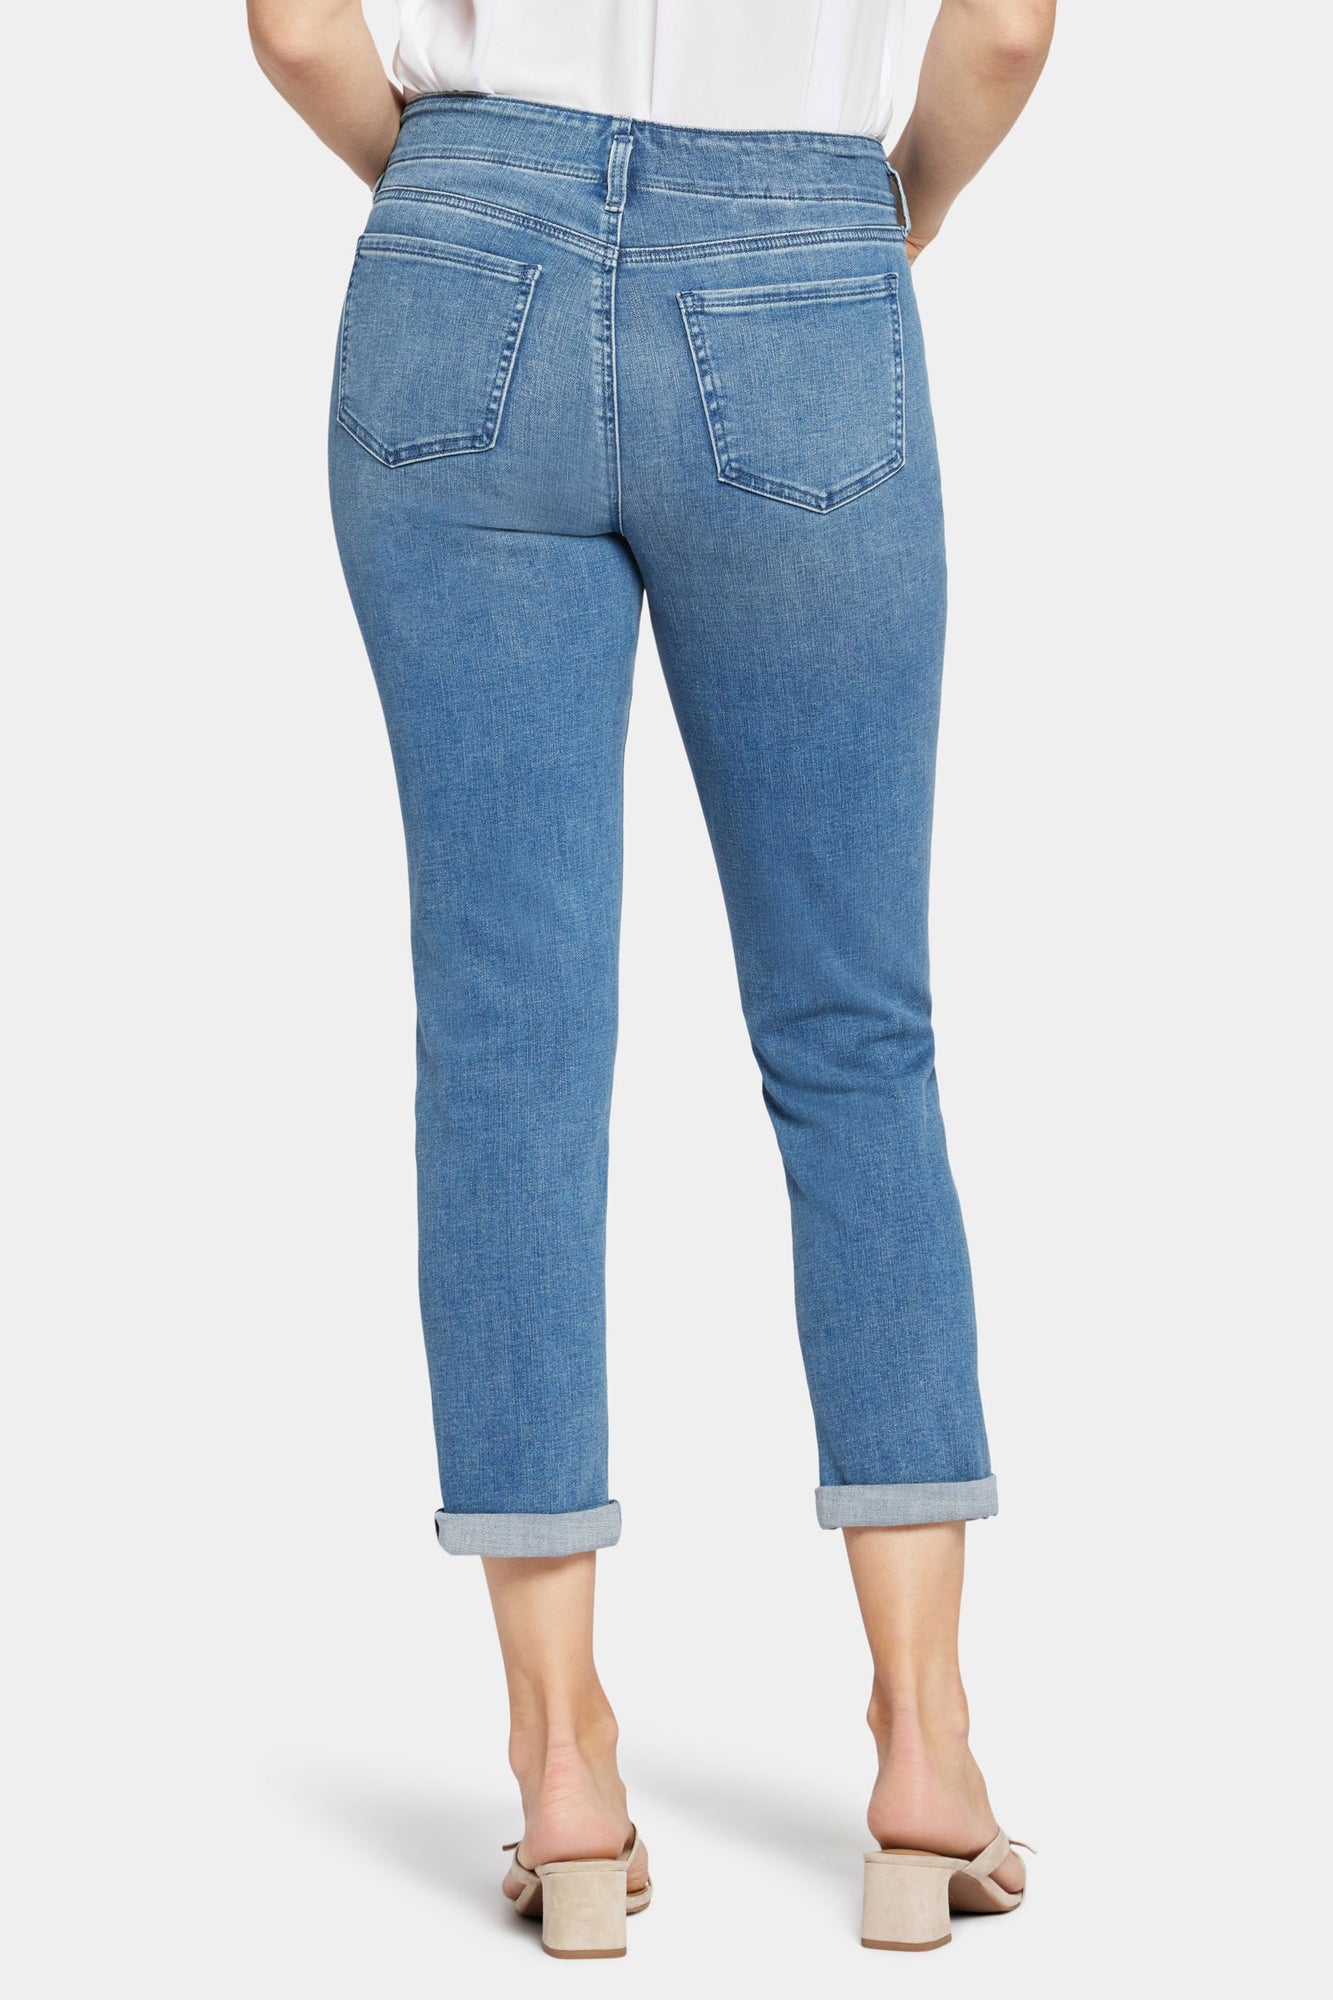 NYDJ Margot Girlfriend Jeans With High Rise - Stunning